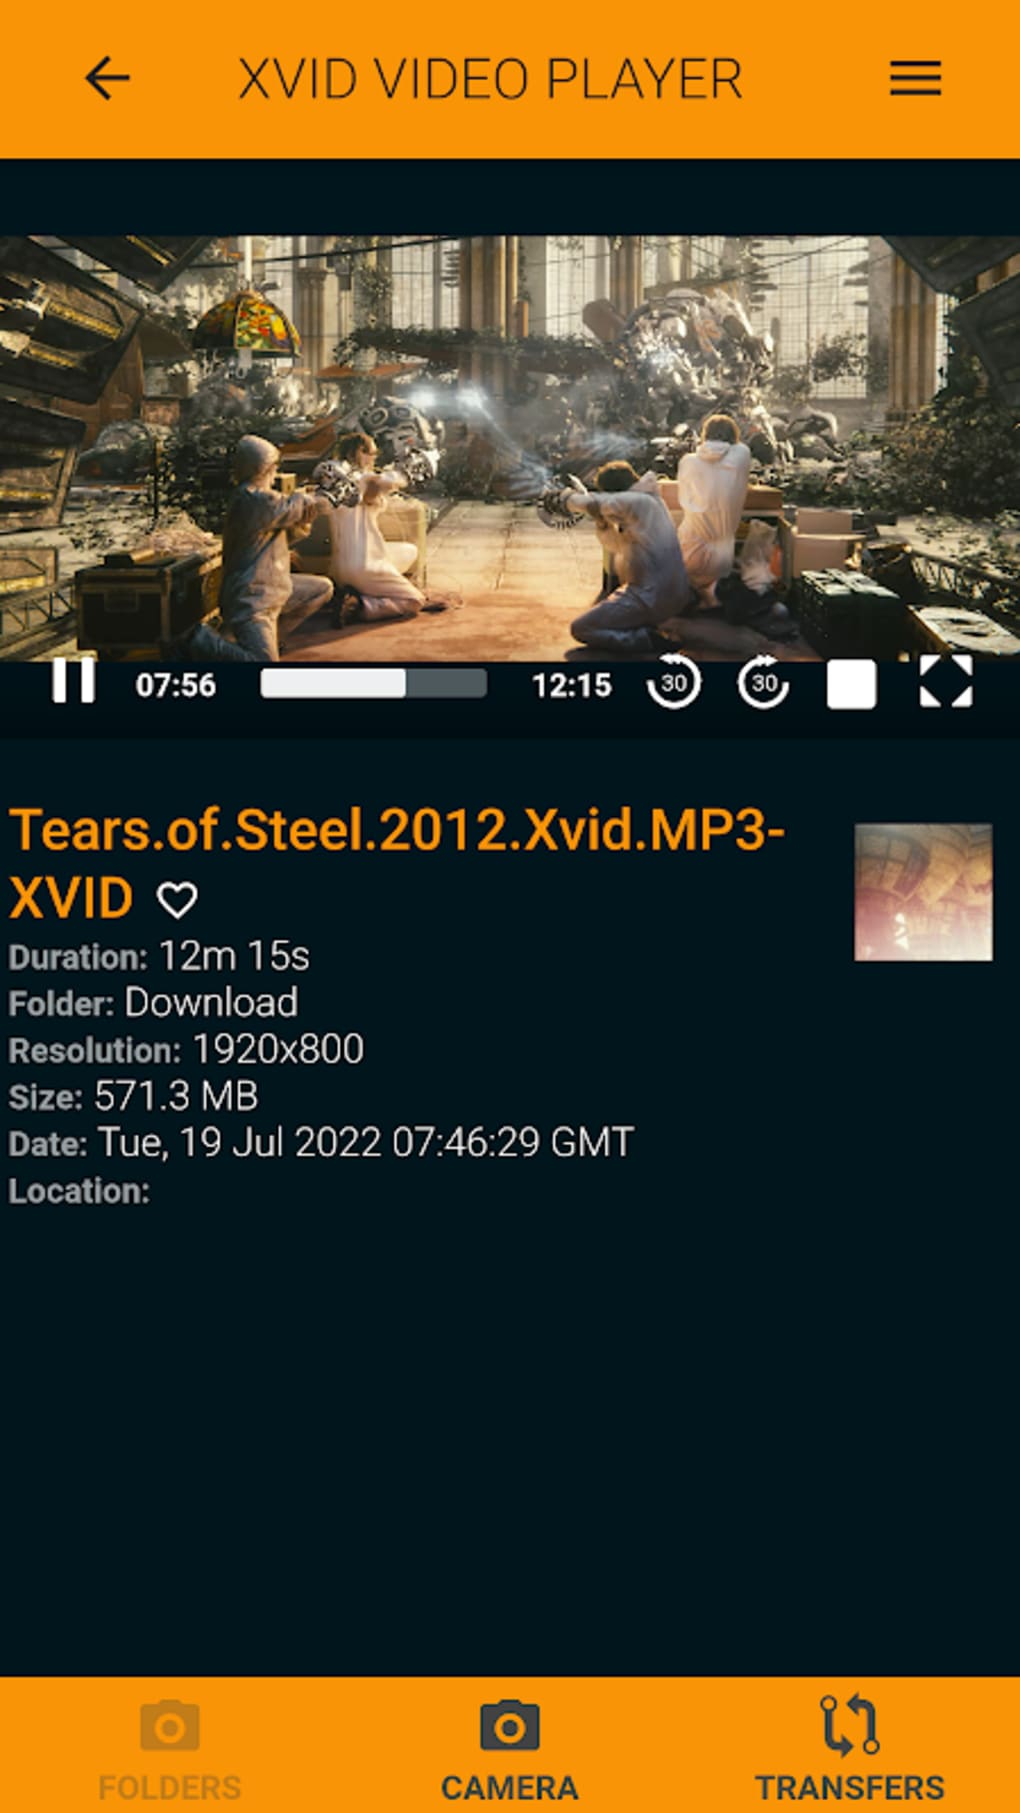 xvid-player-apk-for-android-download